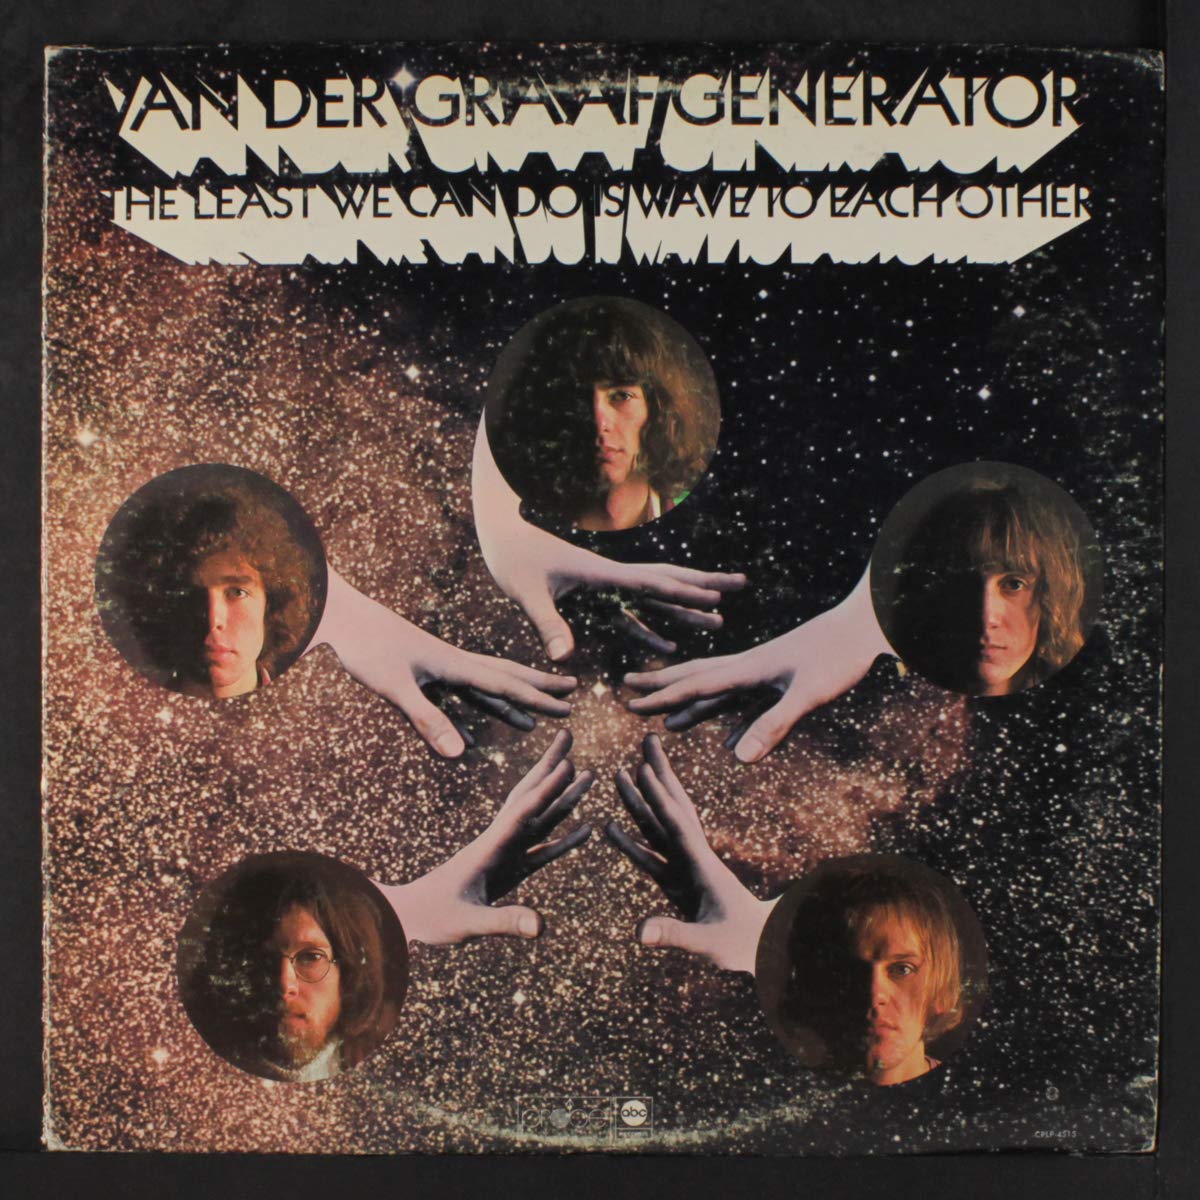 Van Der Graaf Generator - The Least We Can Do Is Wave To Each Other LP